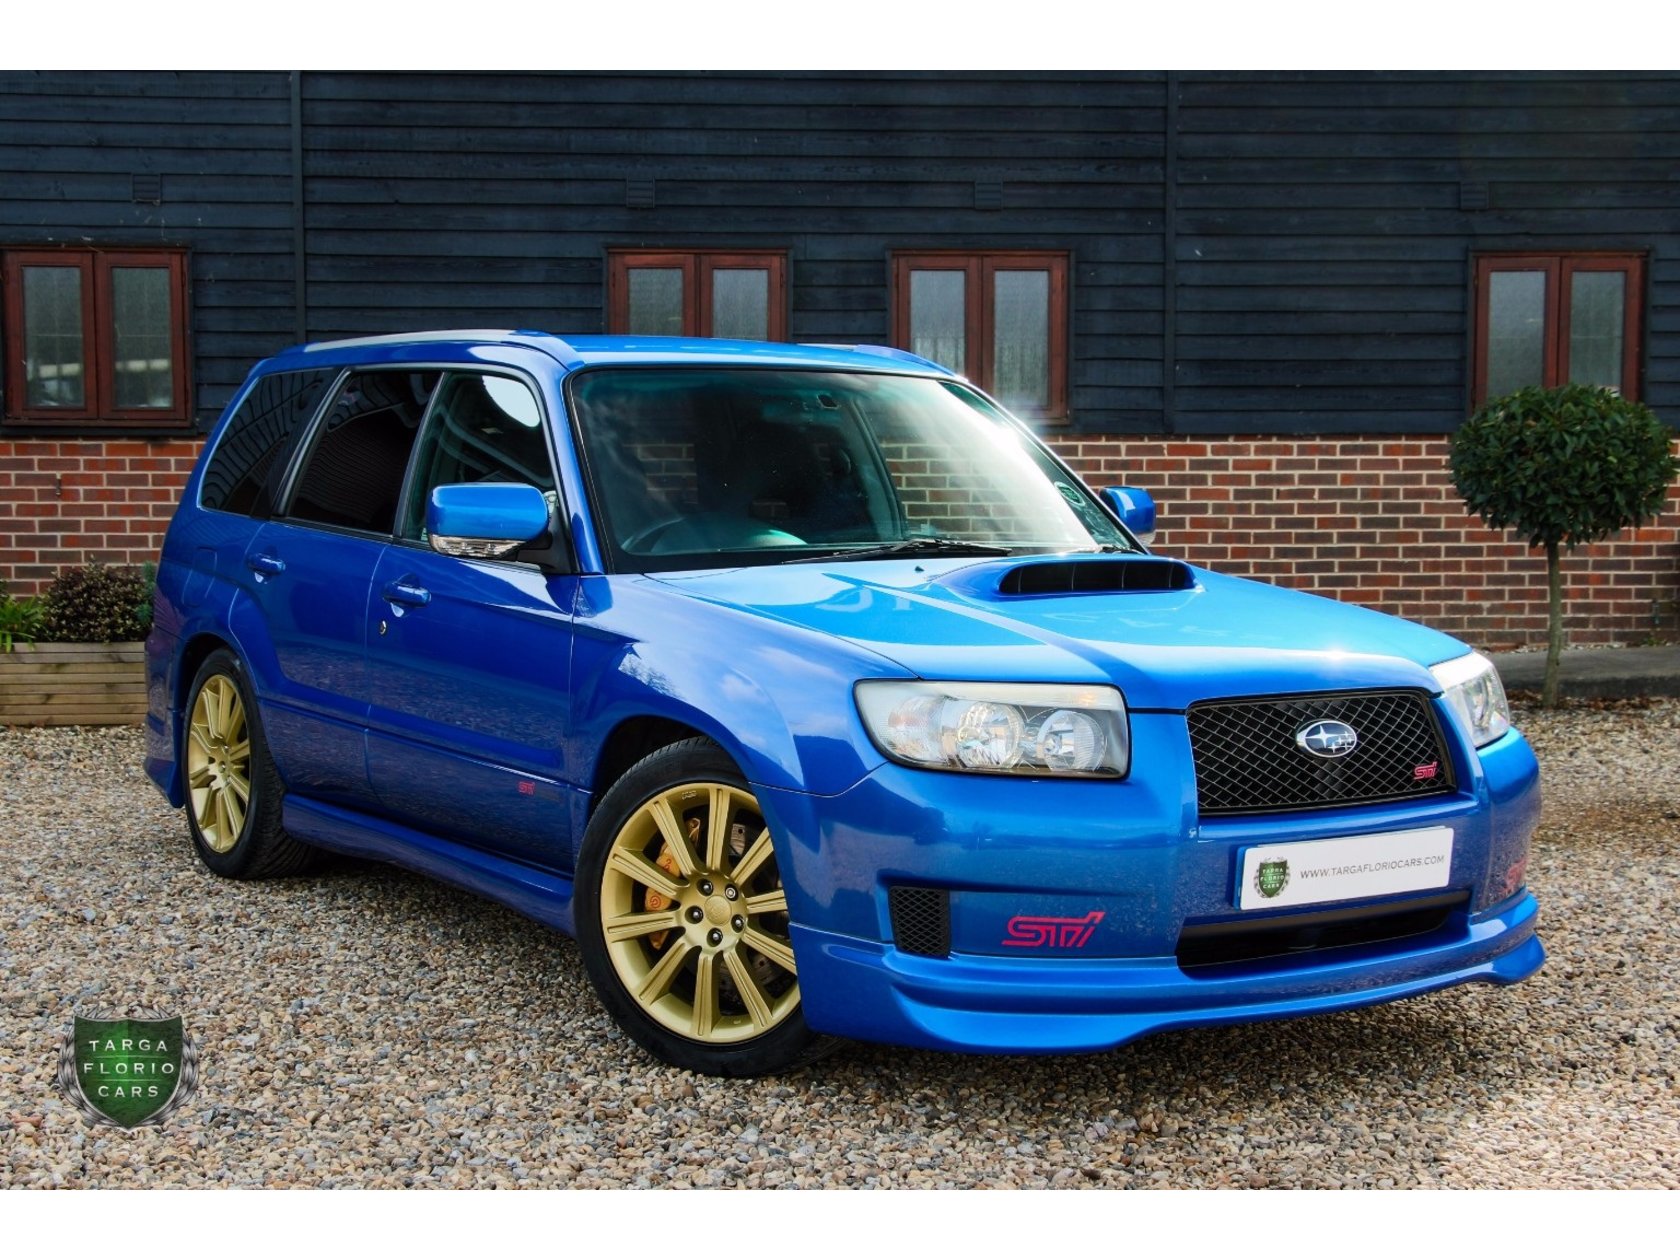 2005 1/2 WRB Forester STi with 37k miles in the UK